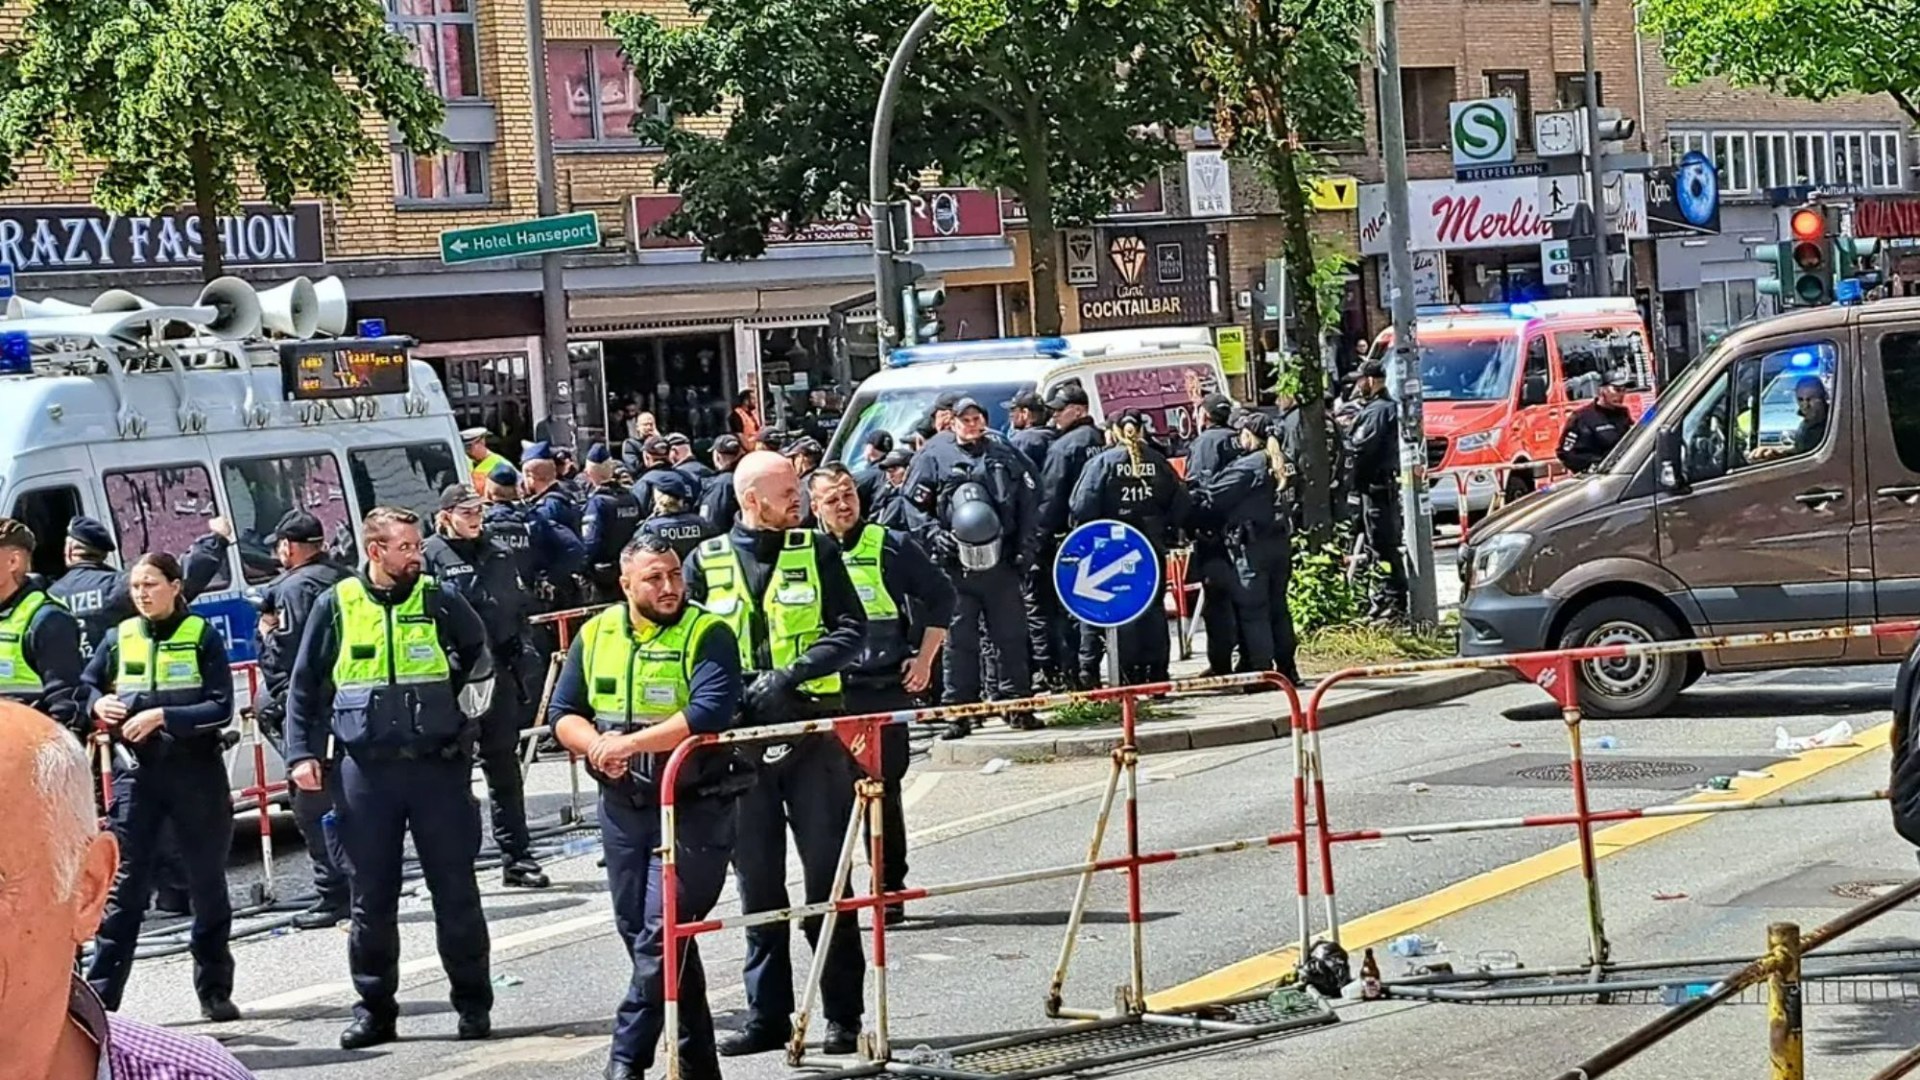 German police shoot axeman 'carrying molotov cocktail' near Hamburg fan zone after suspect threatens cops